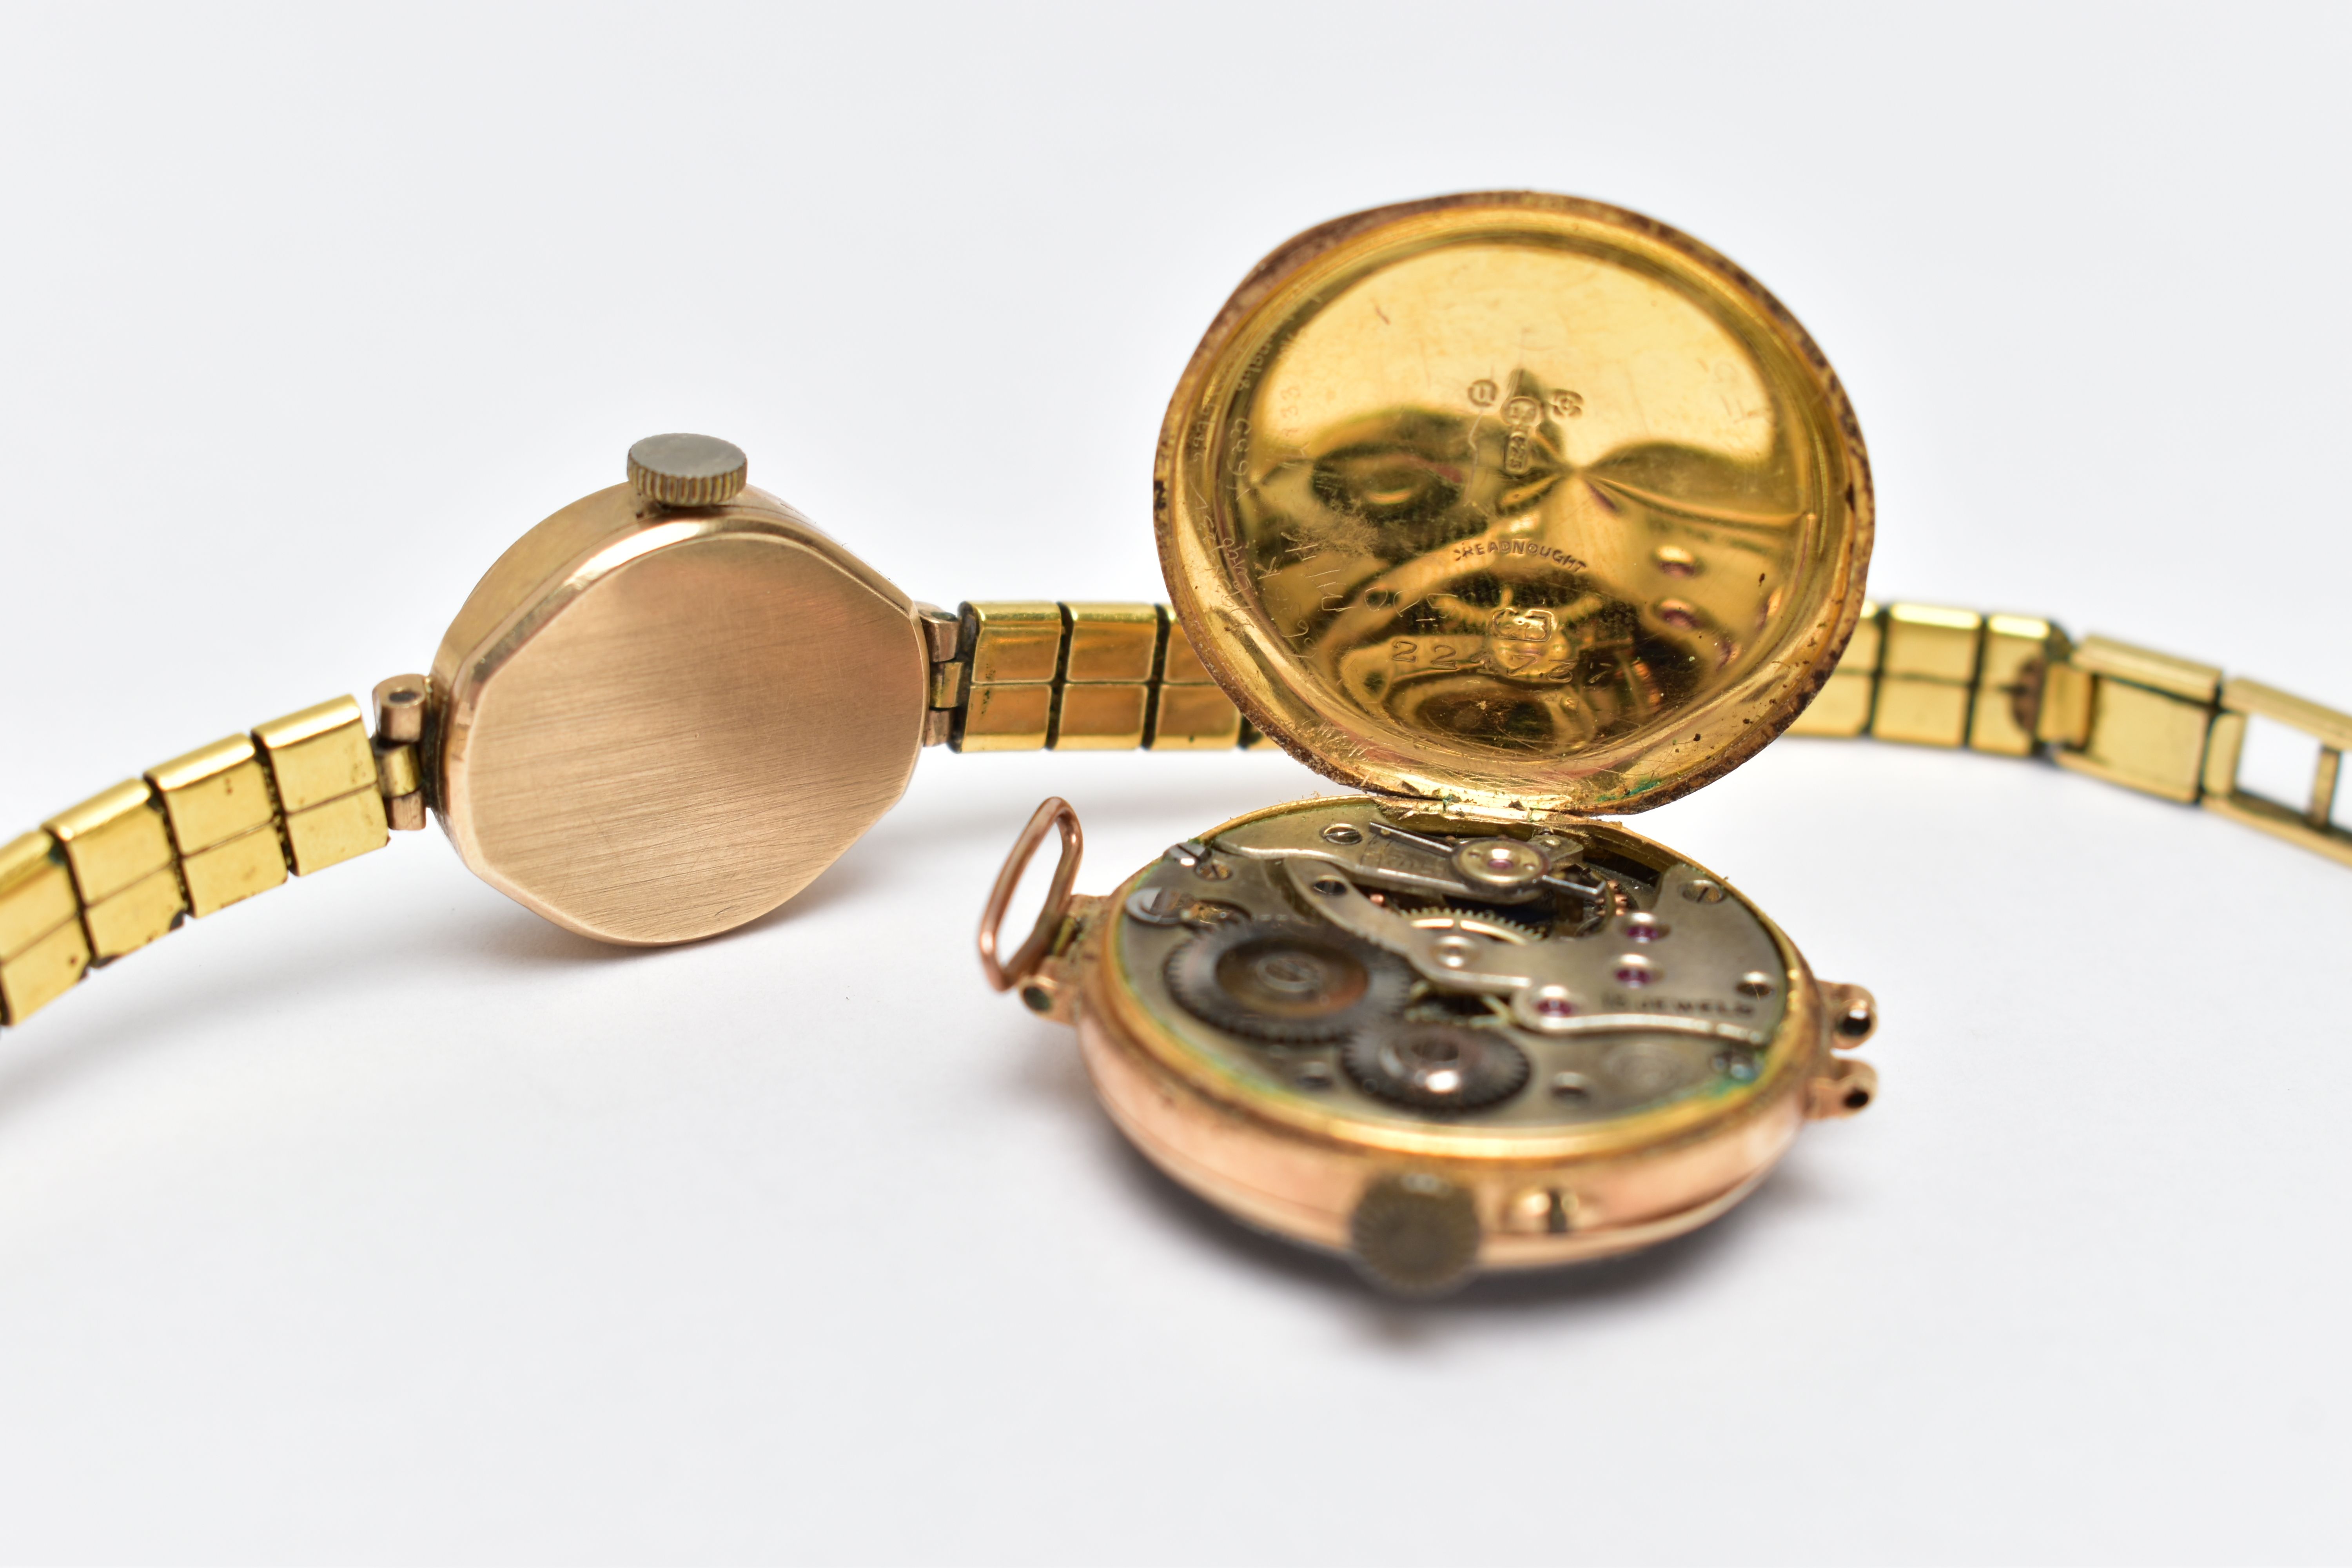 A LADY'S 9CT 'ROTARY' WRISTWATCH AND A 15CT GOLD WATCH, the lady's manual wind Rotary, with a - Image 3 of 5